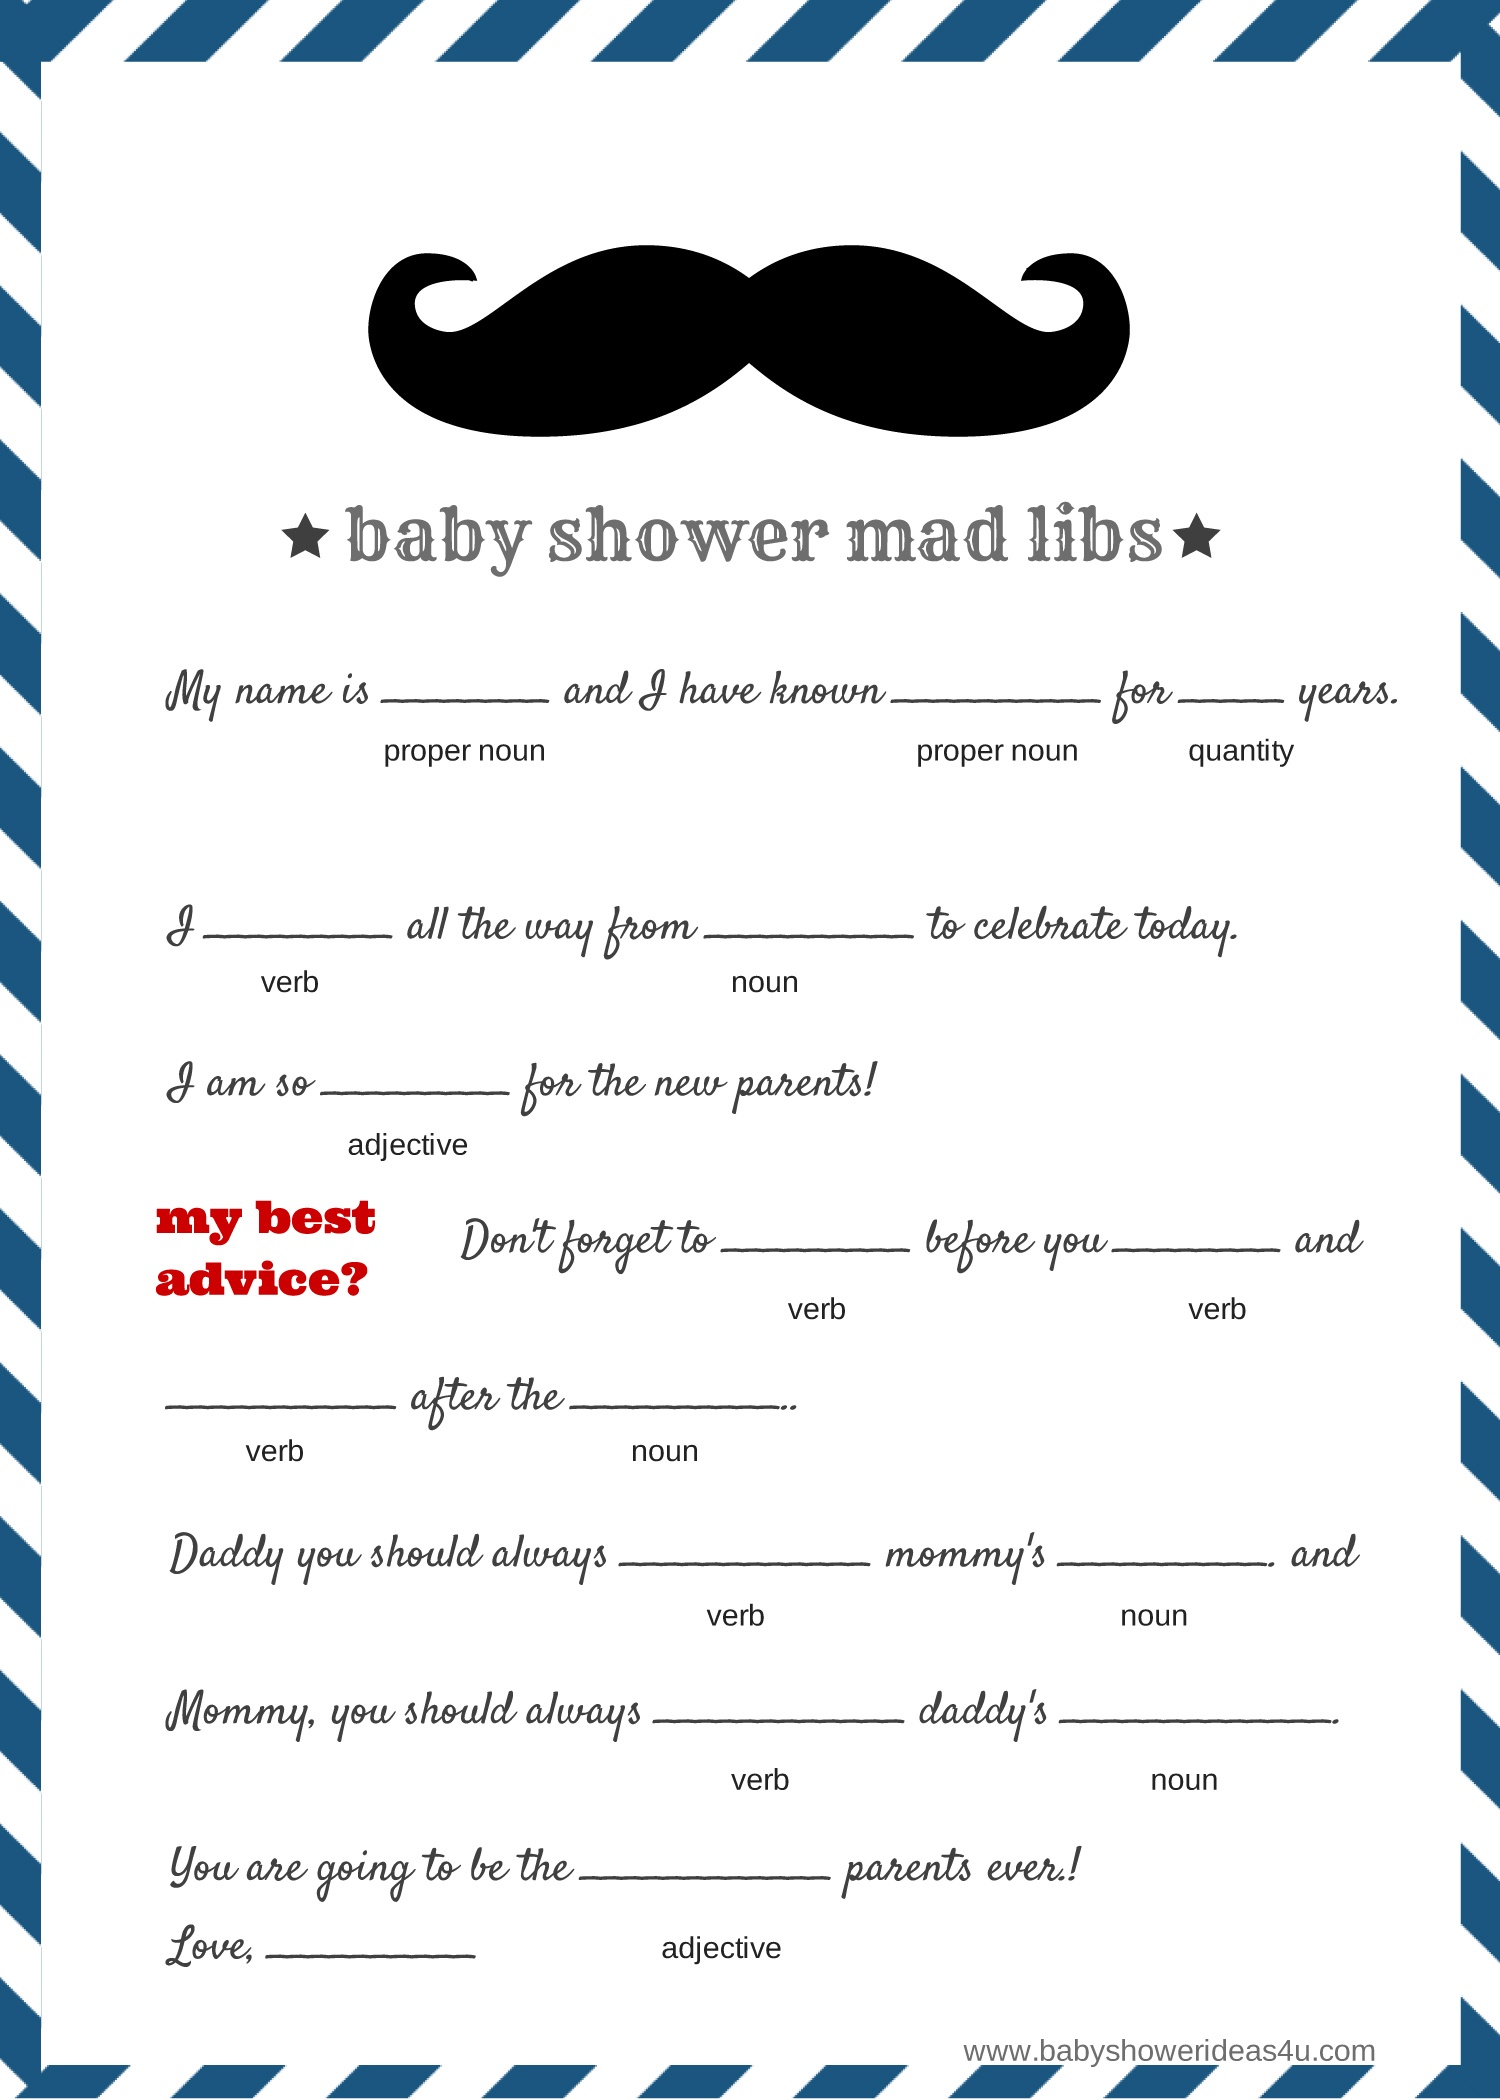 Free Baby Mad Libs Game - Baby Advice - Baby Shower Ideas - Themes - Name That Mustache Game Printable Free